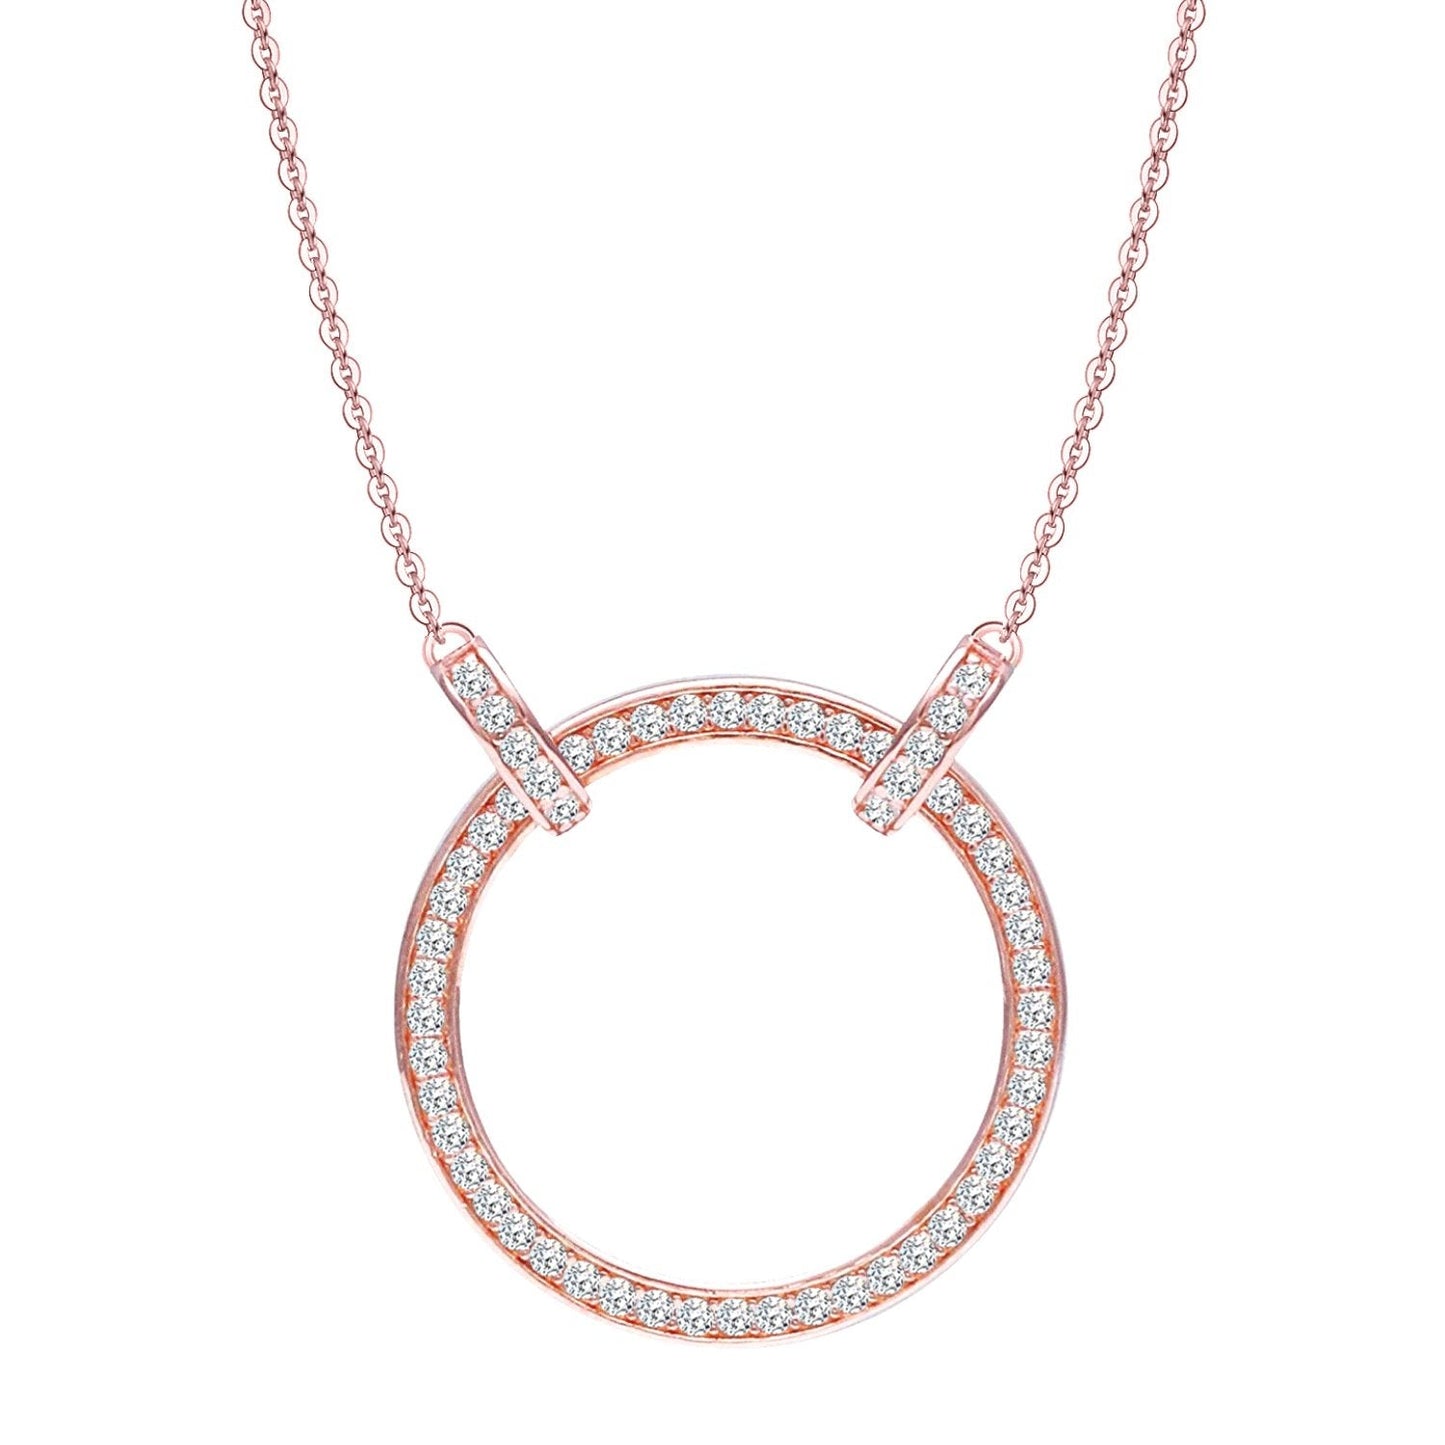 Circle of Life Celebrity Necklace in 92.5 Silver 18k Rose Gold finish - Studded with Swiss Zirconia Unity, Wholeness and Completeness